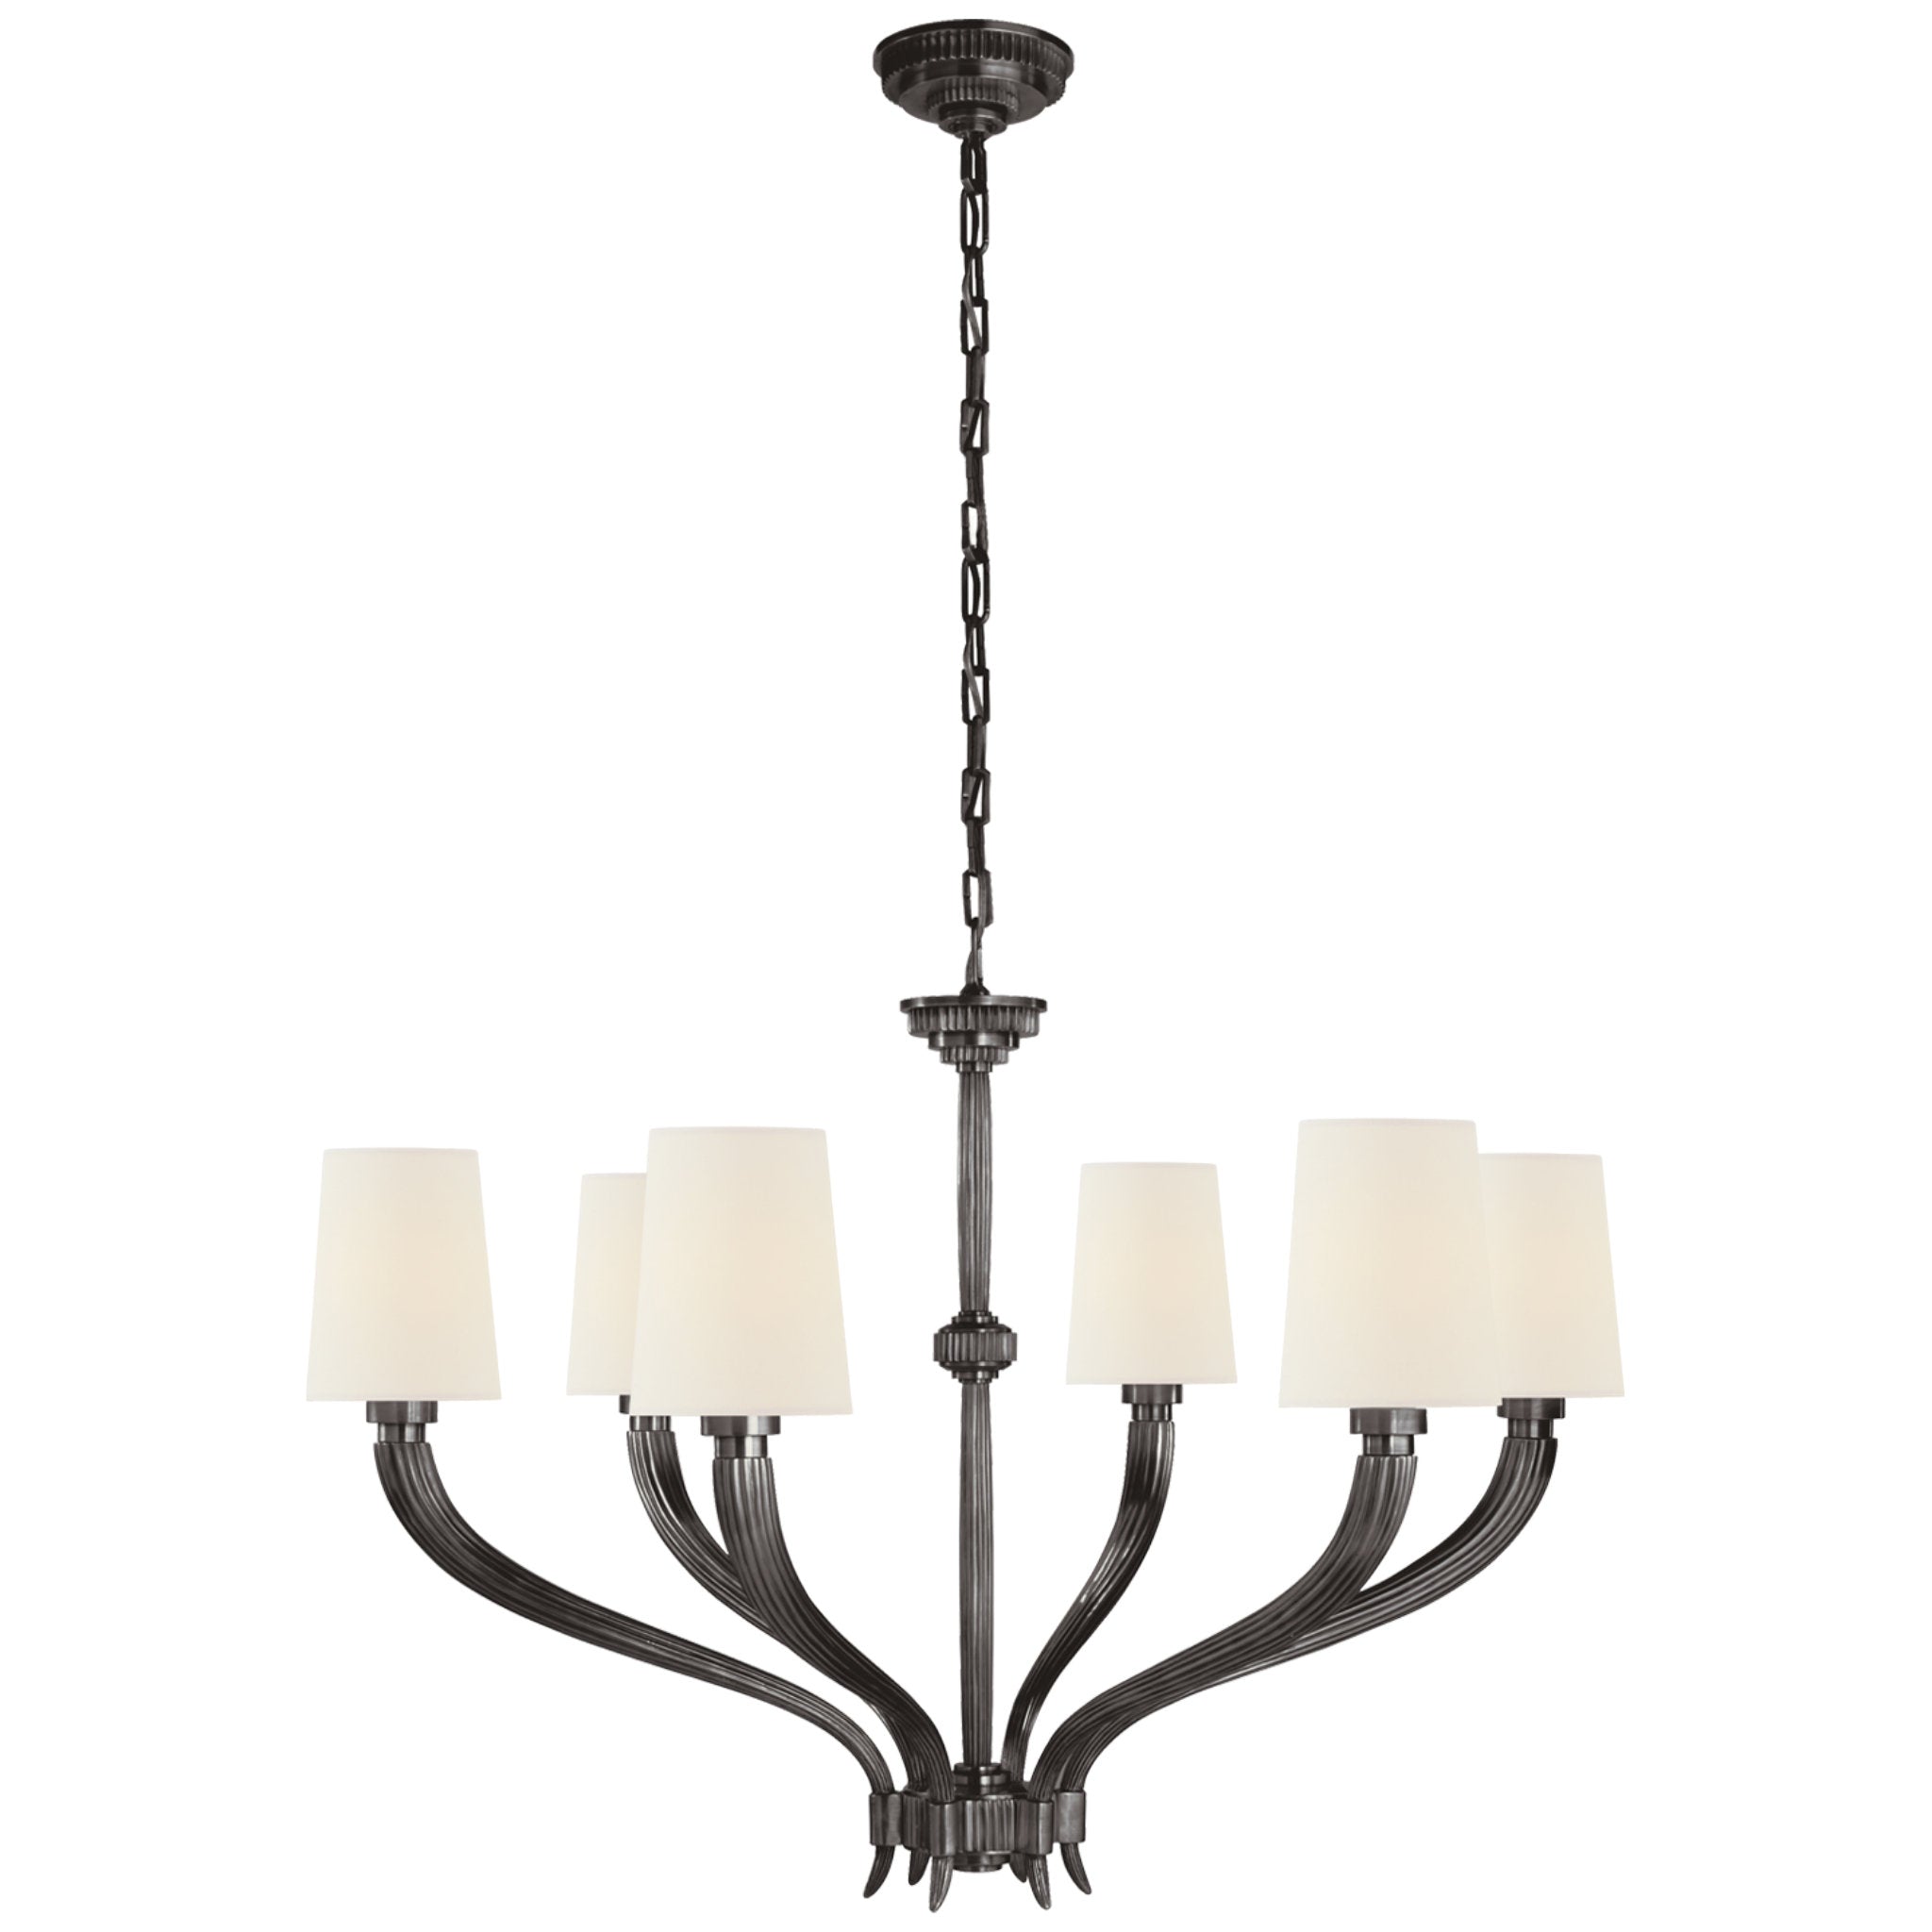 Chapman & Myers Ruhlmann Large Chandelier in Bronze with Linen Shades